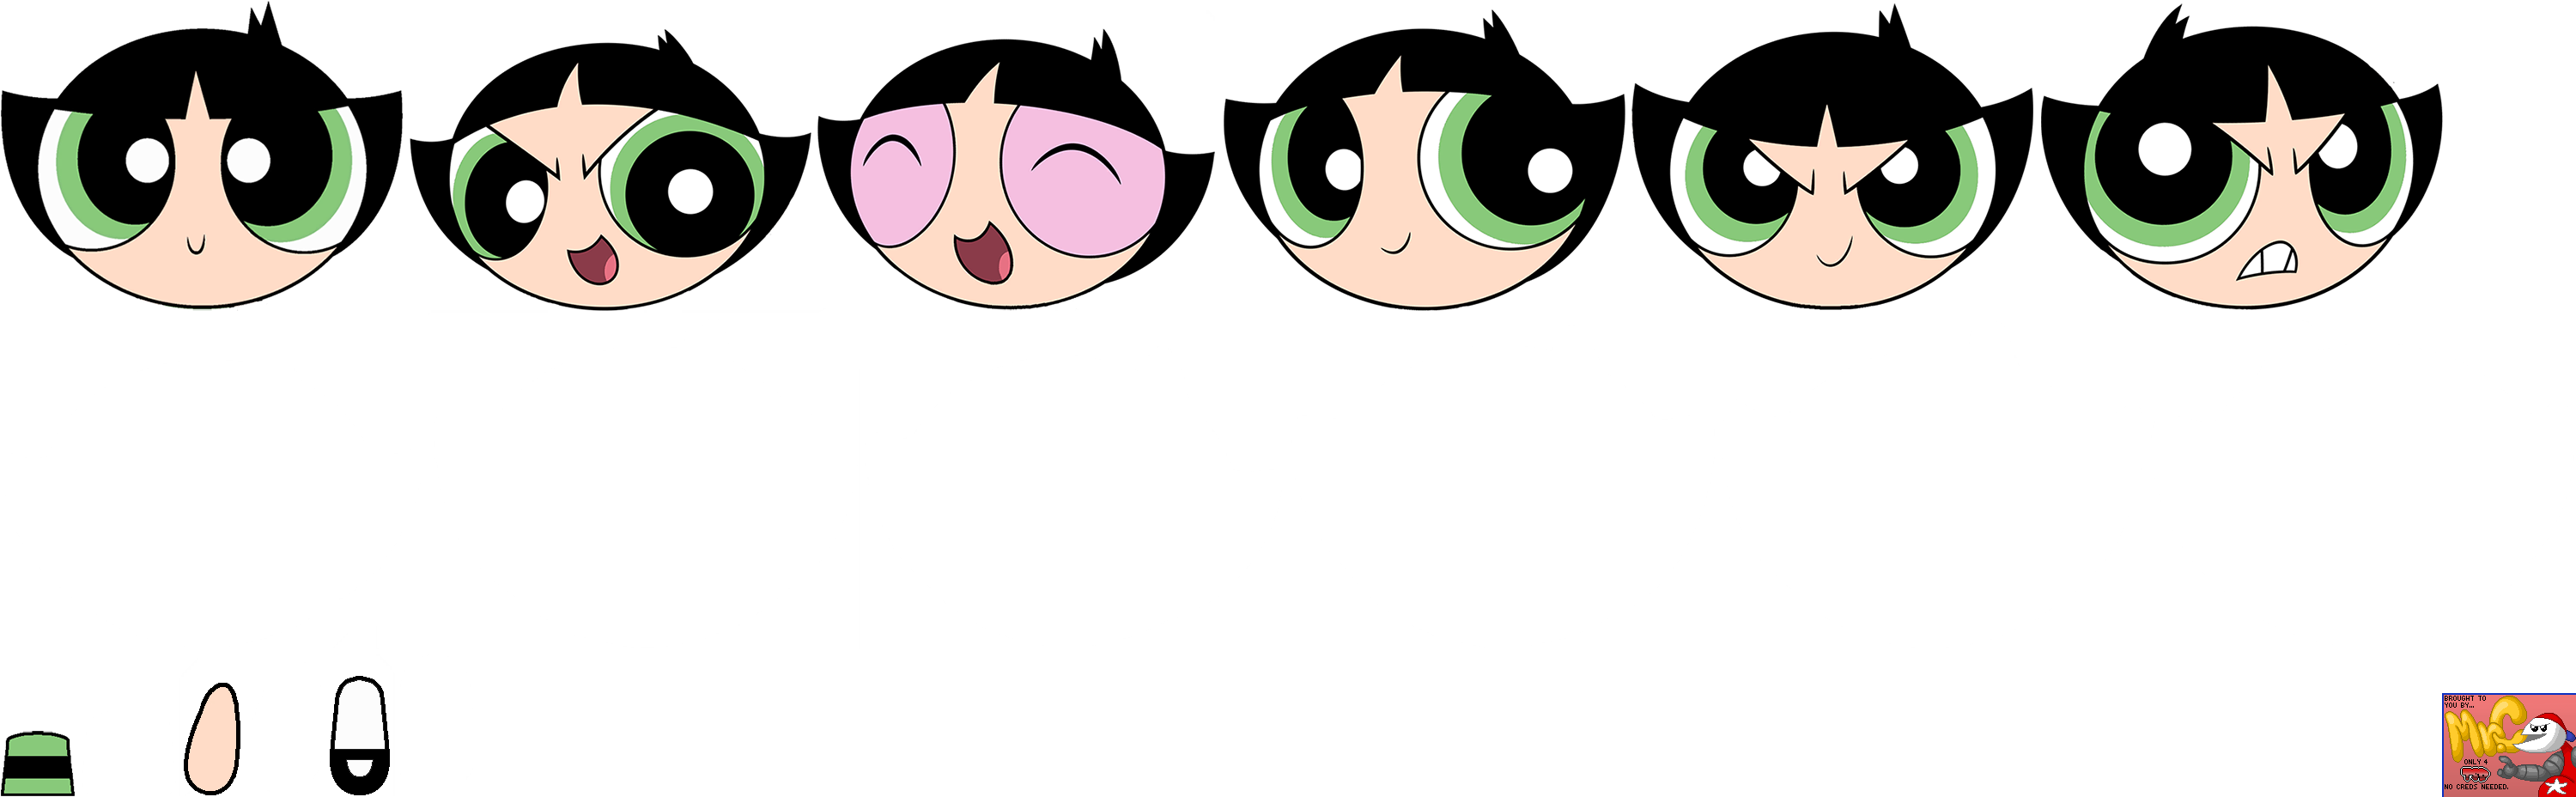 Powerpuff Girls Expressions Sequence